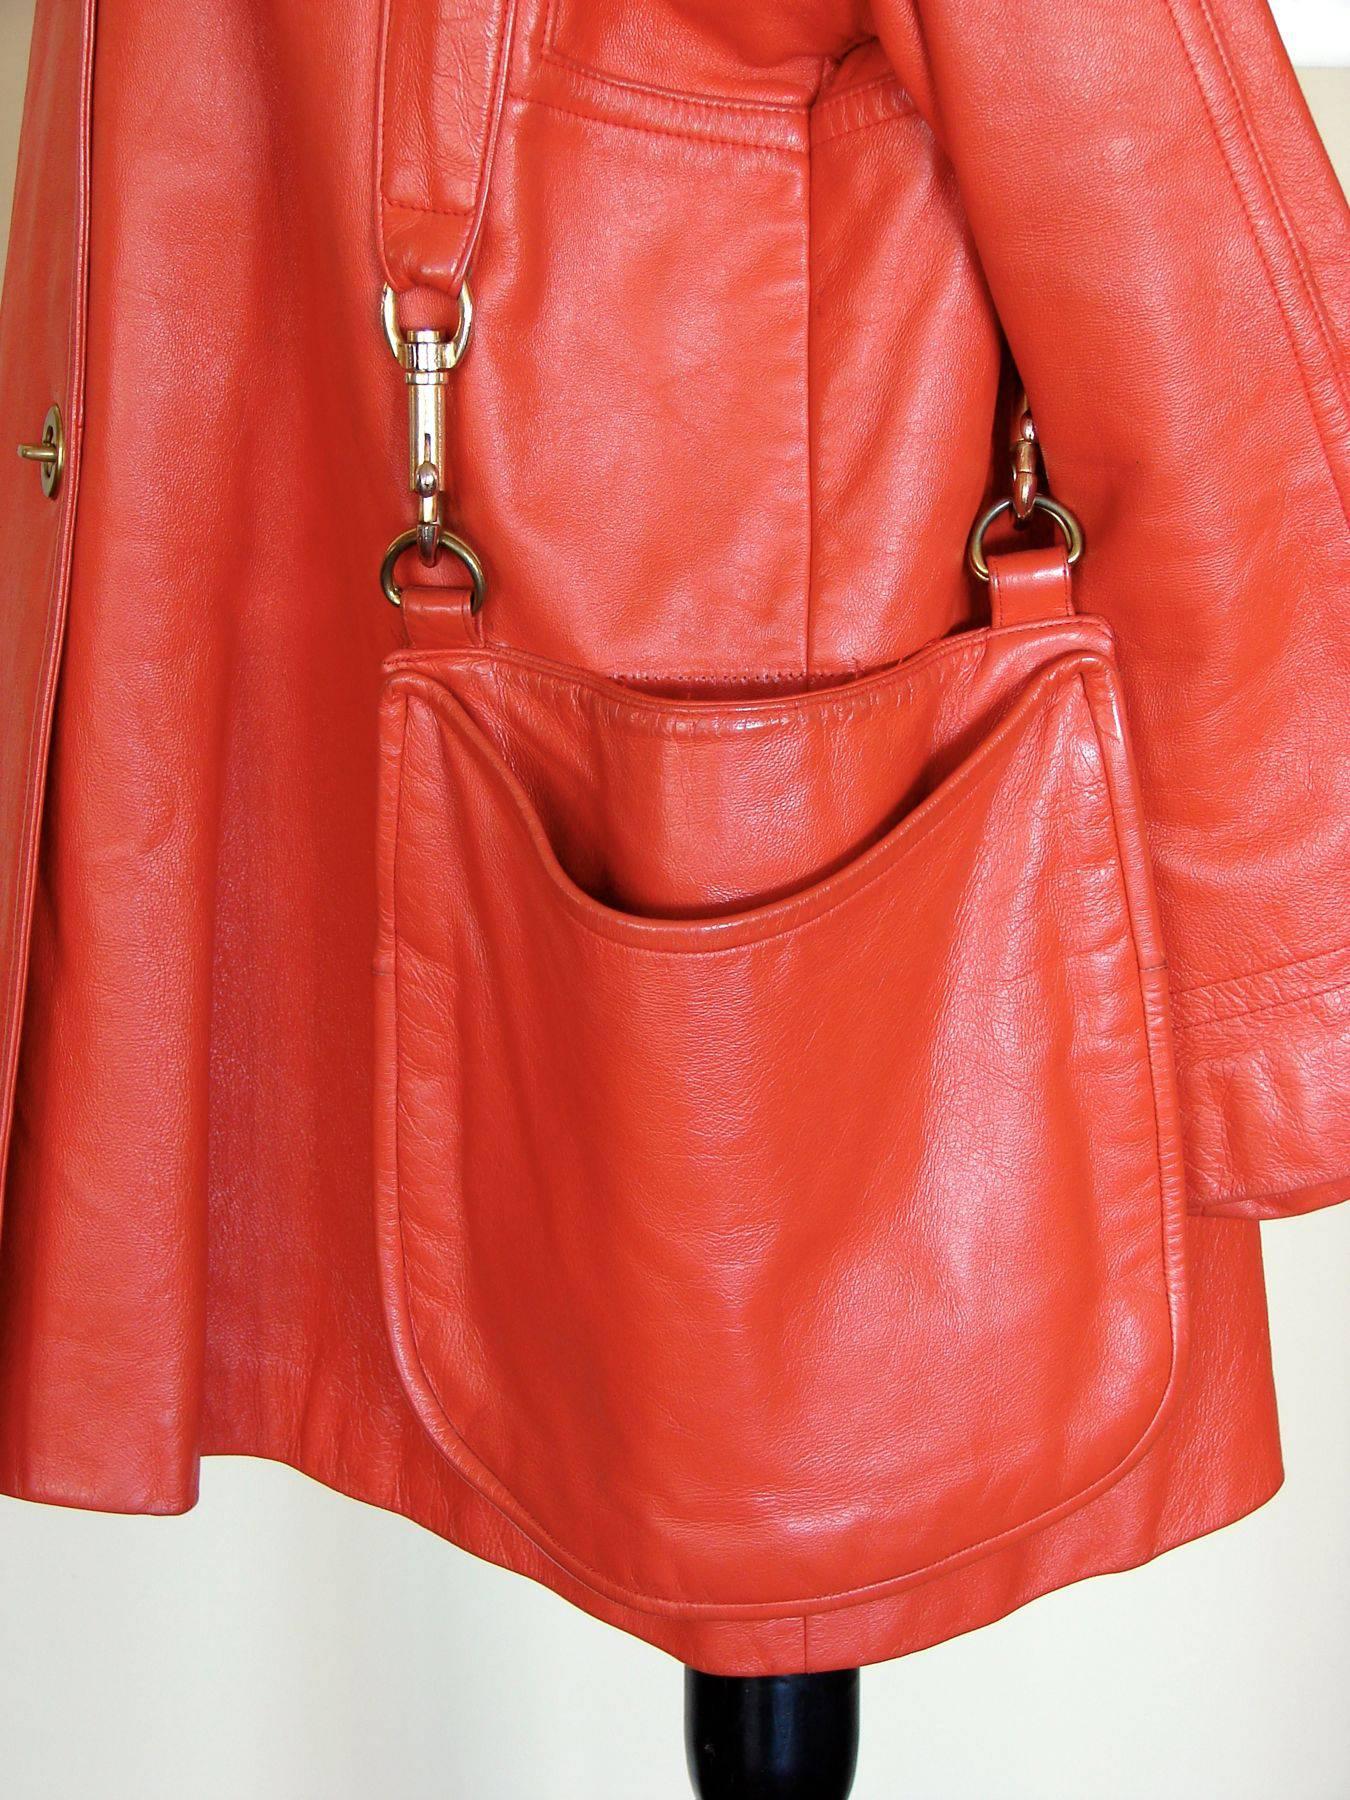 Bonnie Cashin for Sills Orange Leather Jacket Attached Hobo Bag Purse 1960s 1